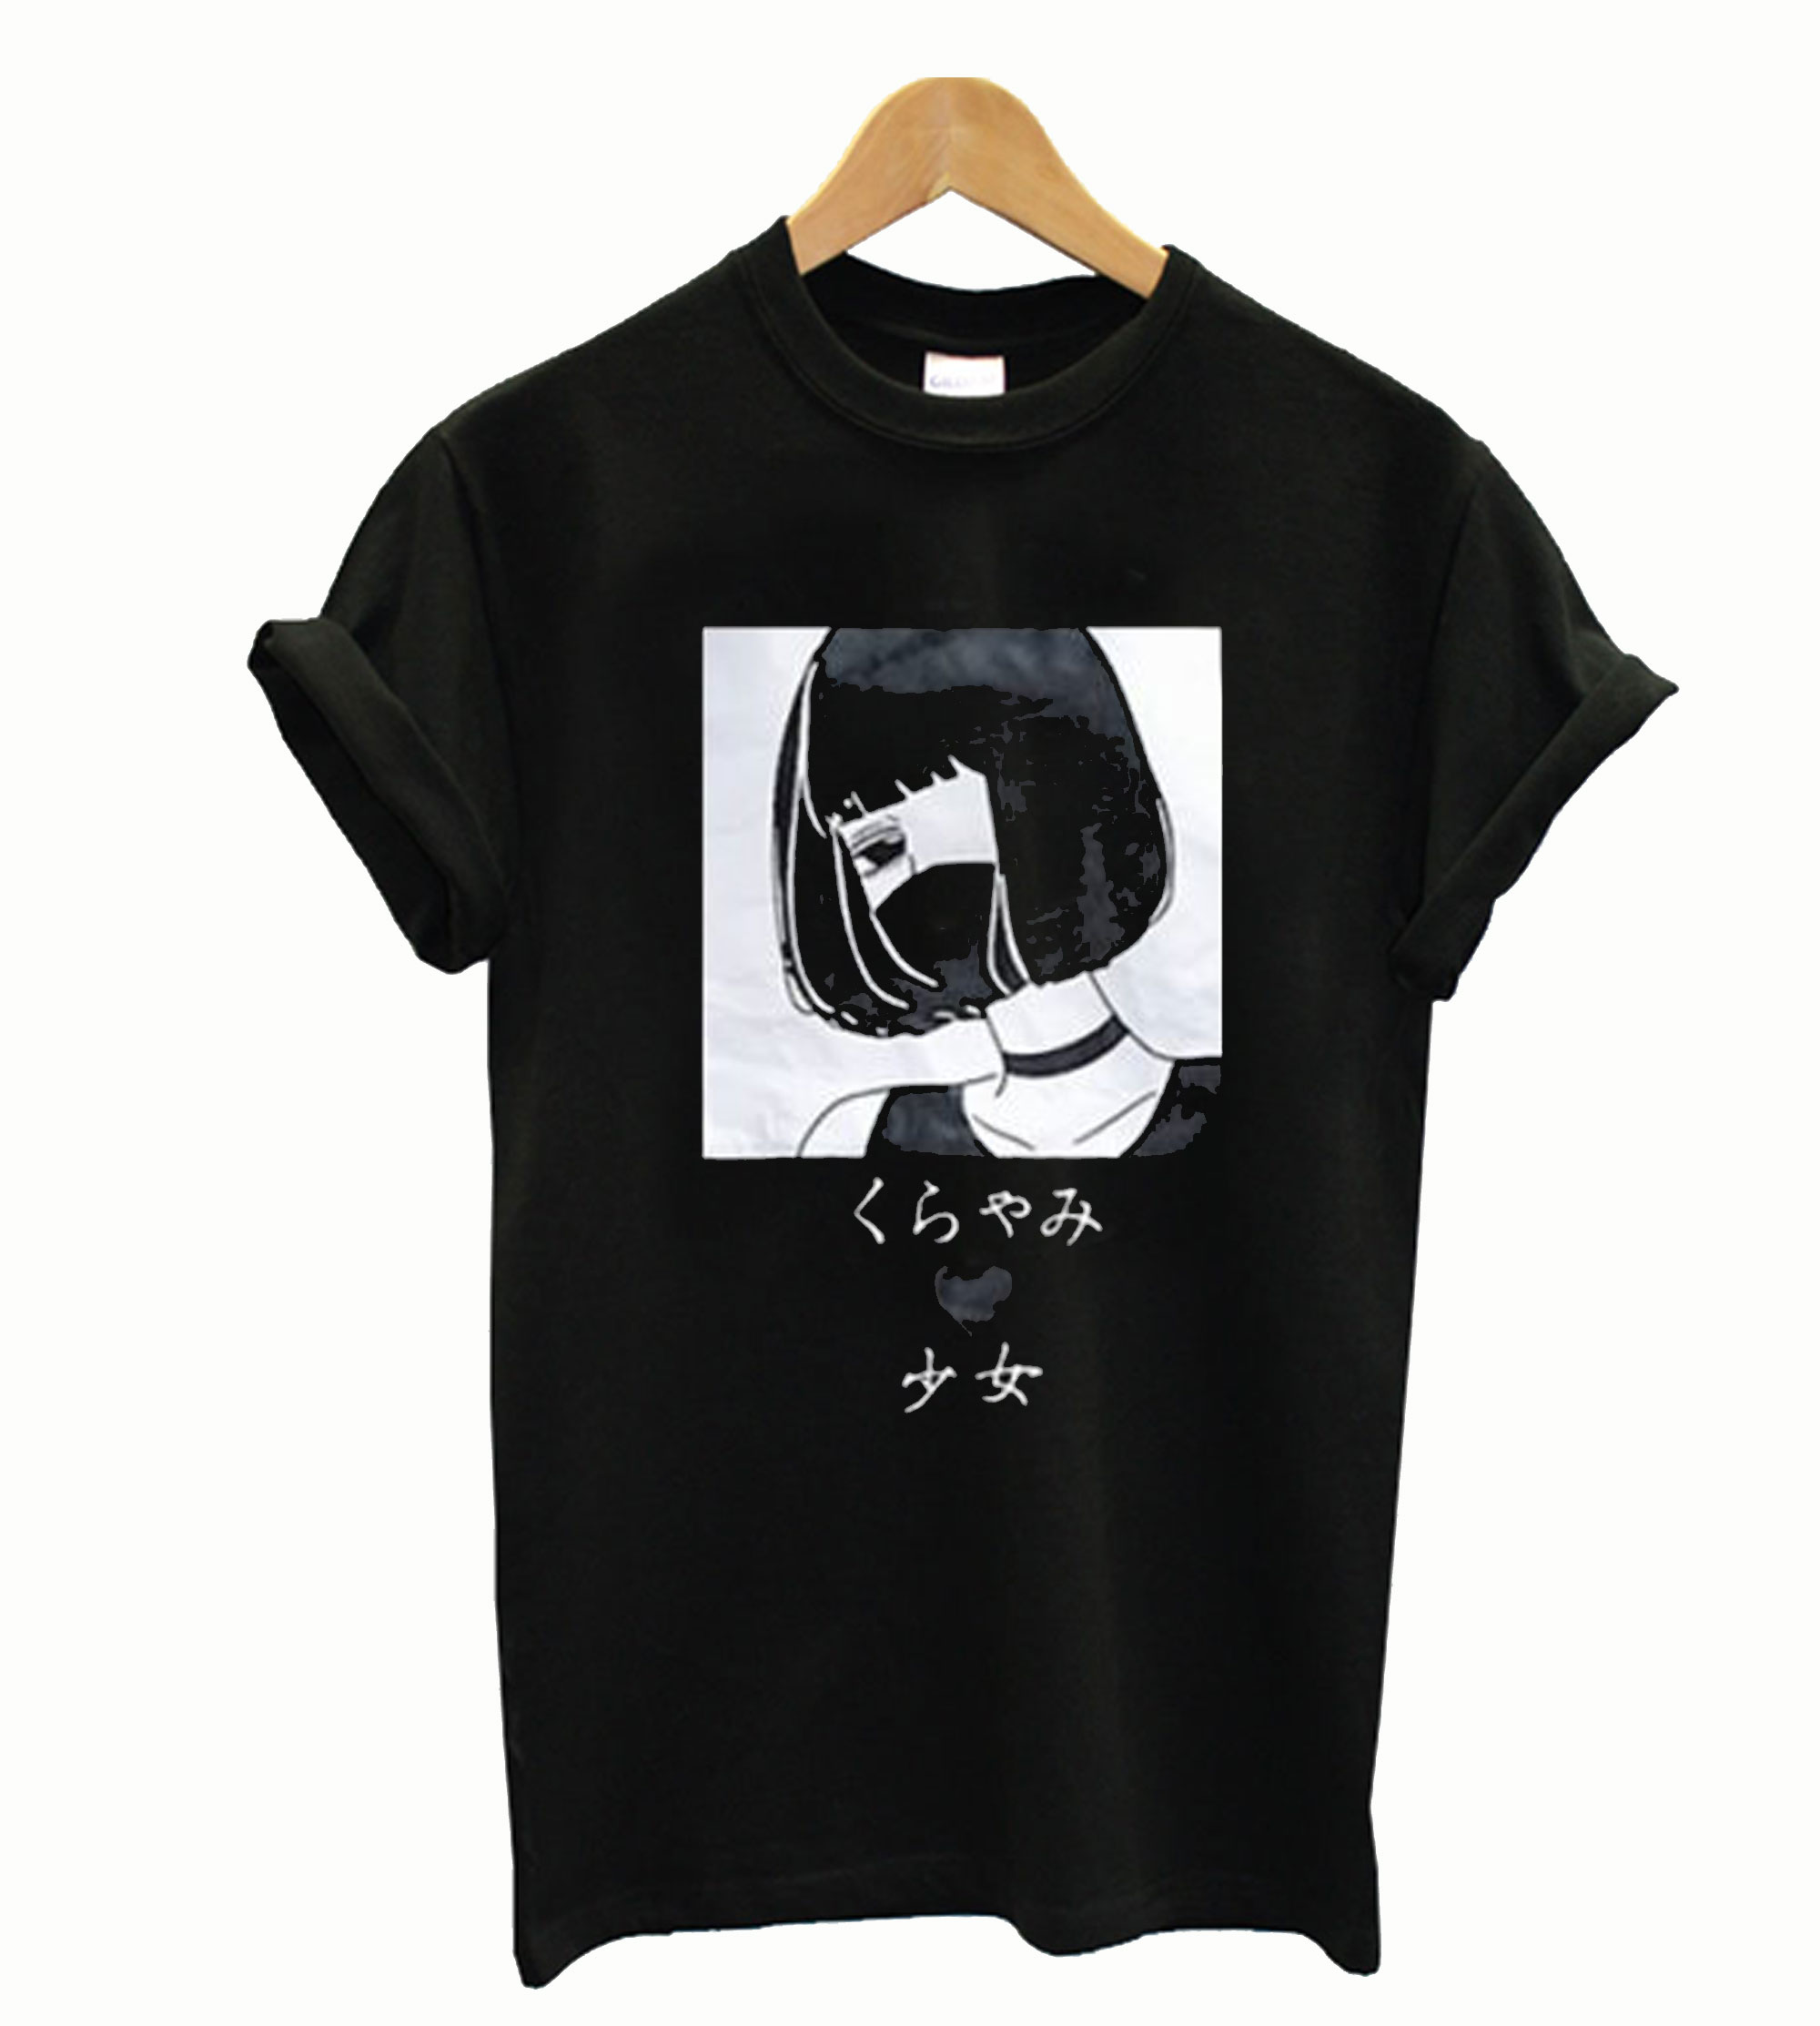 Anime T-Shirts - Buy Cool Anime Printed T-Shirts Online at Bewakoof